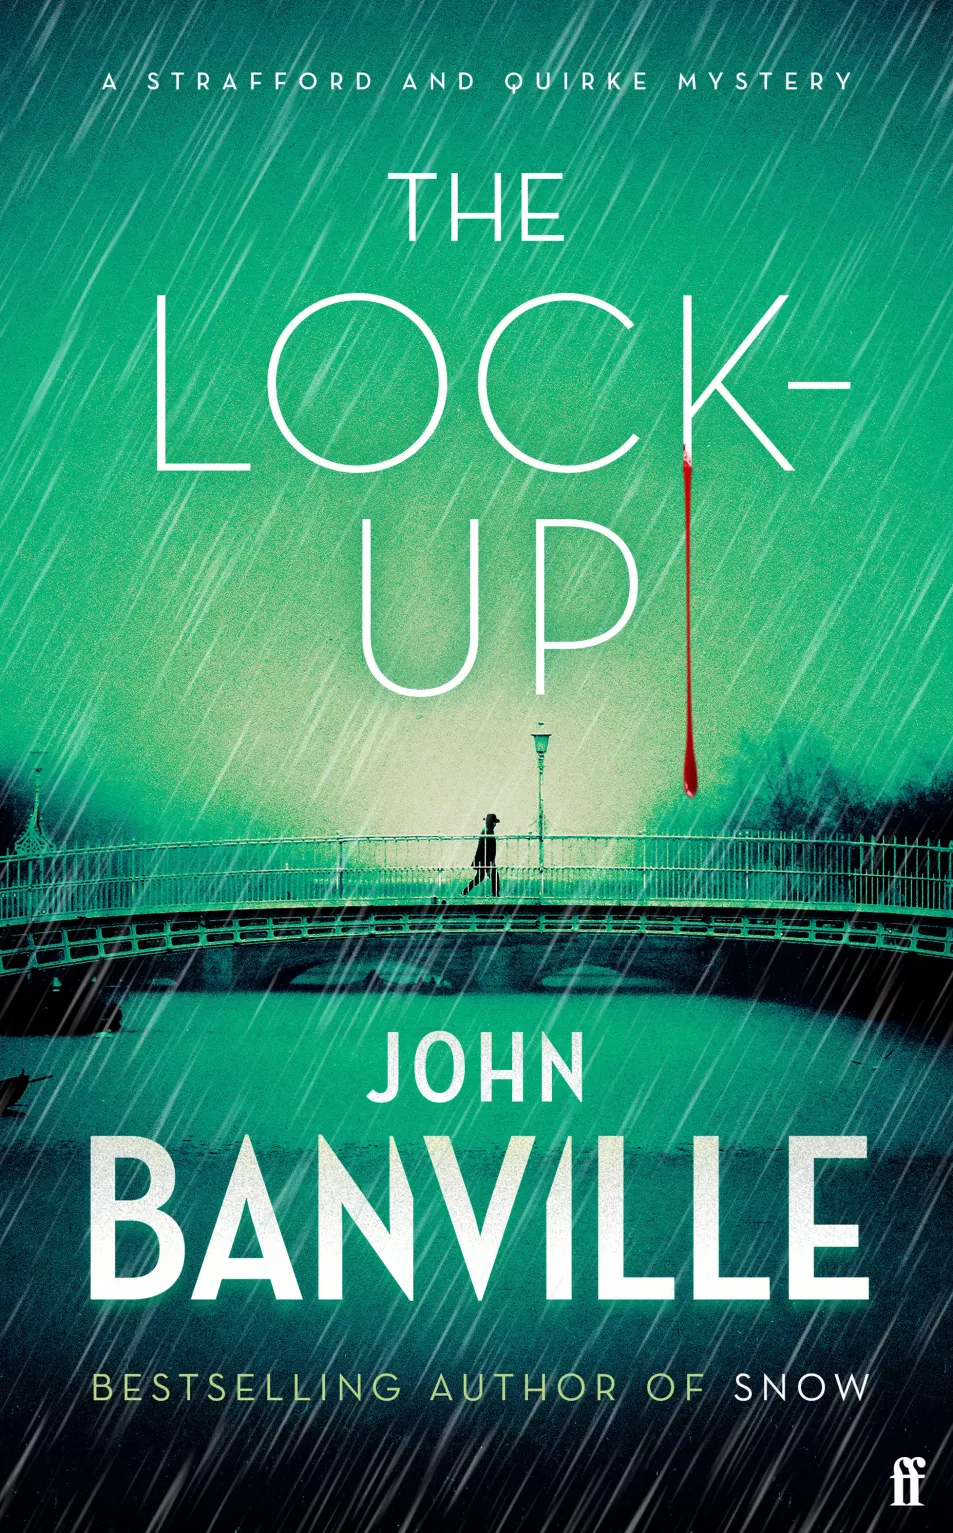 Book jacket of The Lock-Up by John Banville (Faber/PA)